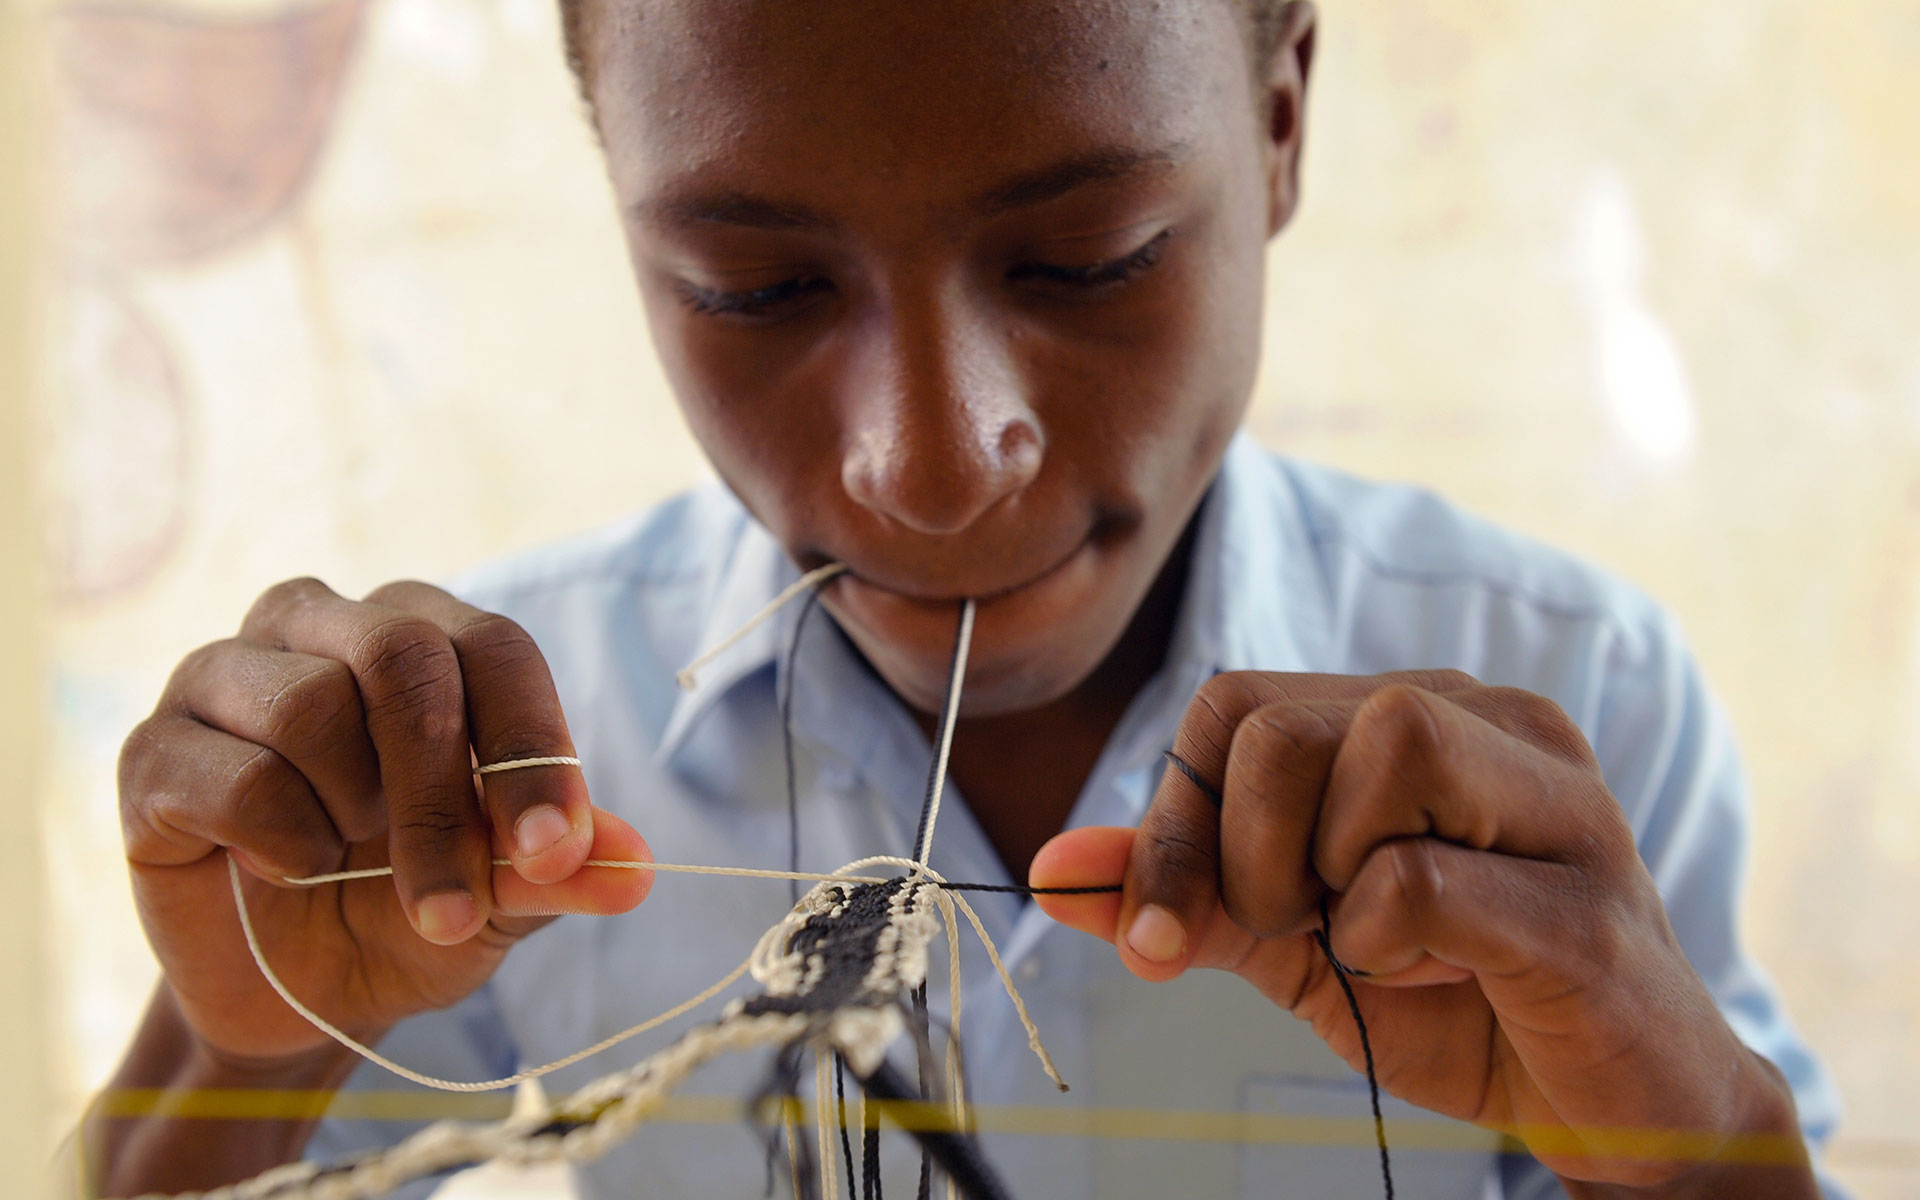 A boy from Haiti learns to tie macrame knots at his Compassion center